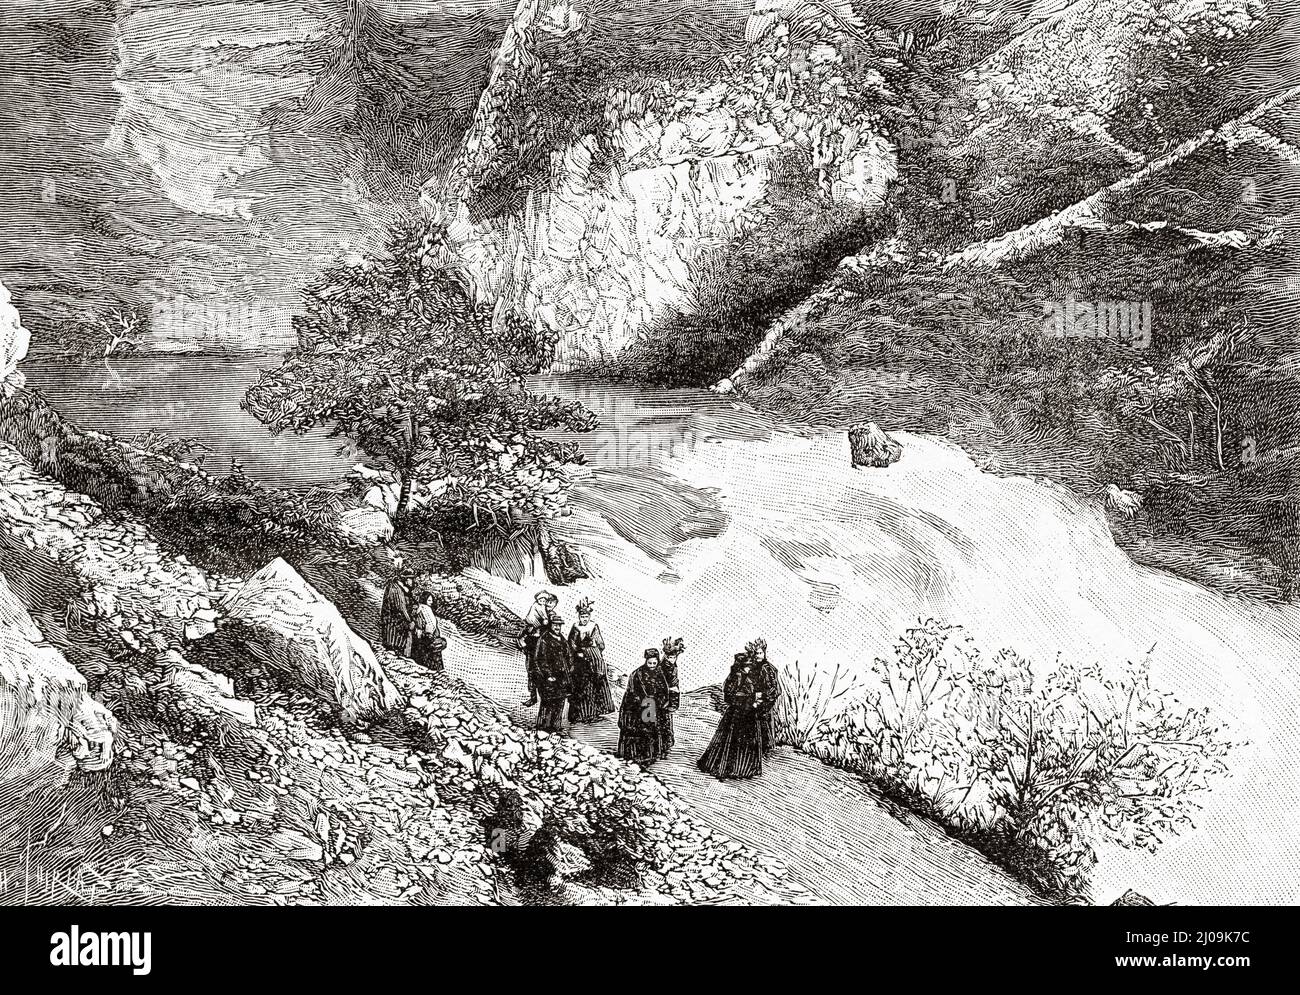 Fountain of Vaucluse, Provence. France, Europe. Old 19th century engraved illustration from La Nature 1899 Stock Photo